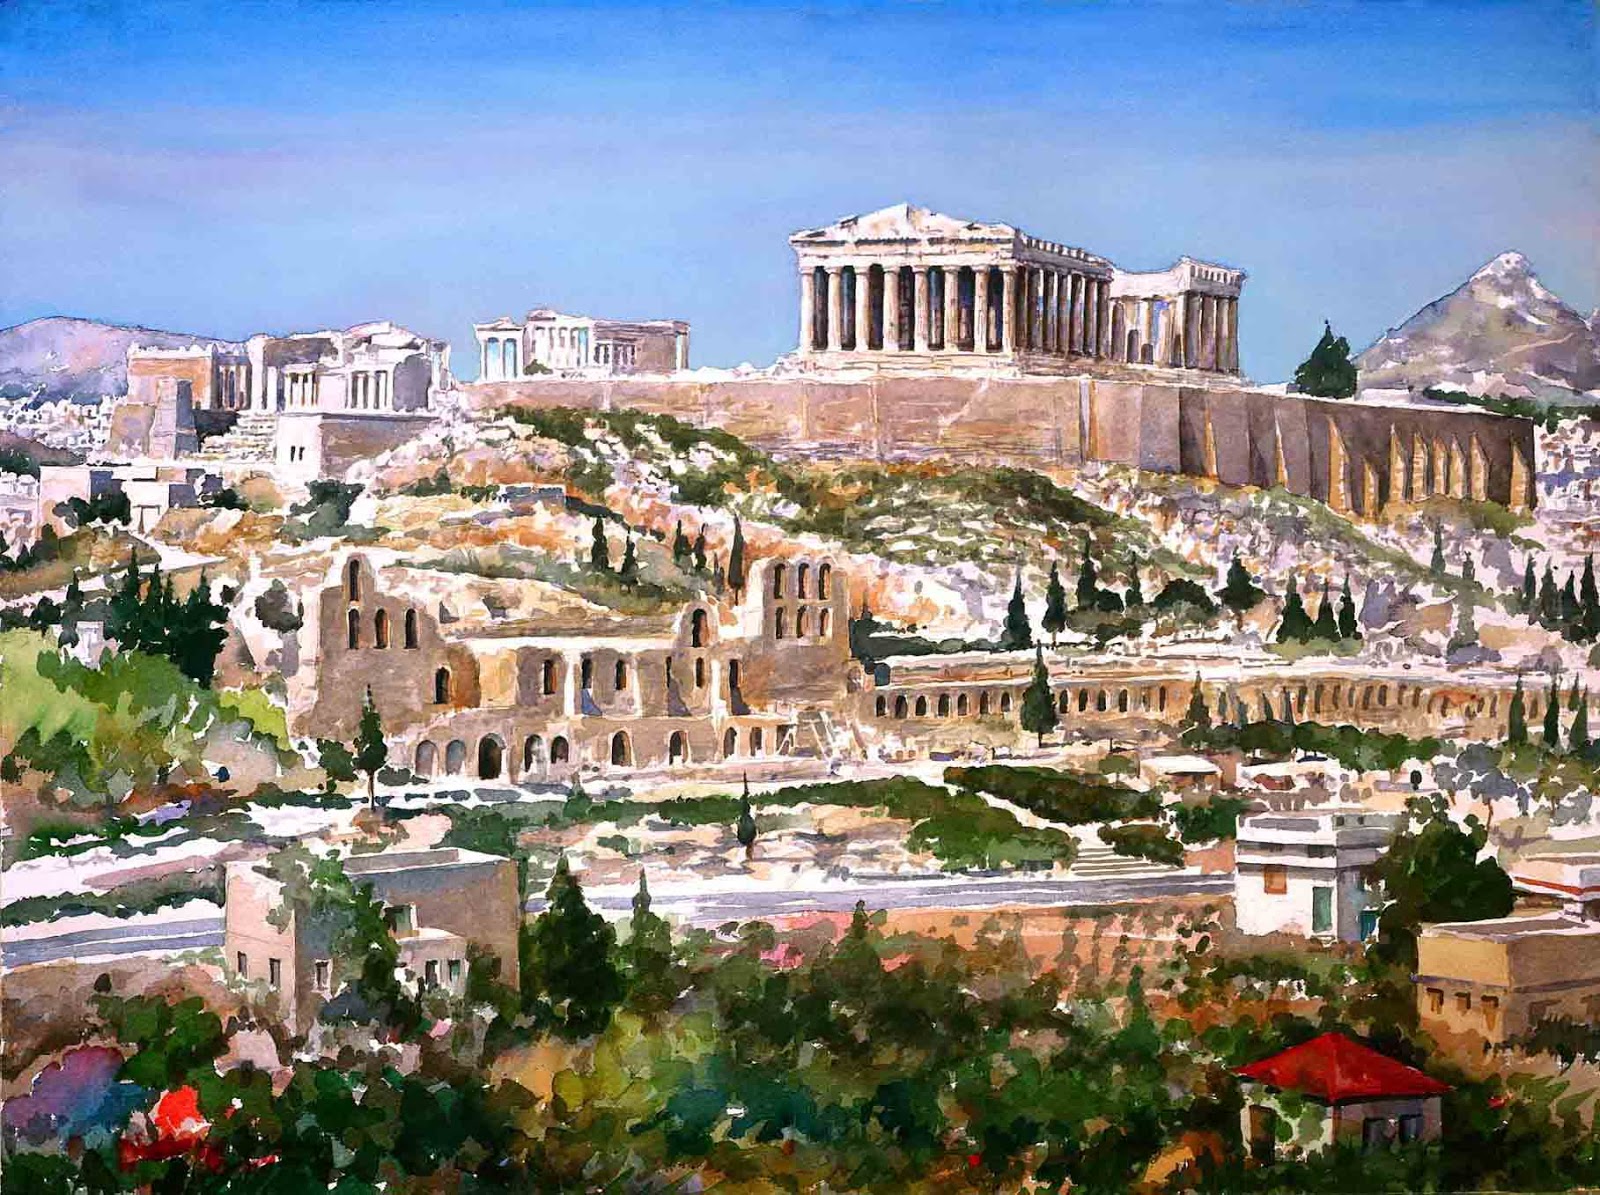 World Visits: Acropolis Of Athens Is An Ancient Citadel In Greece